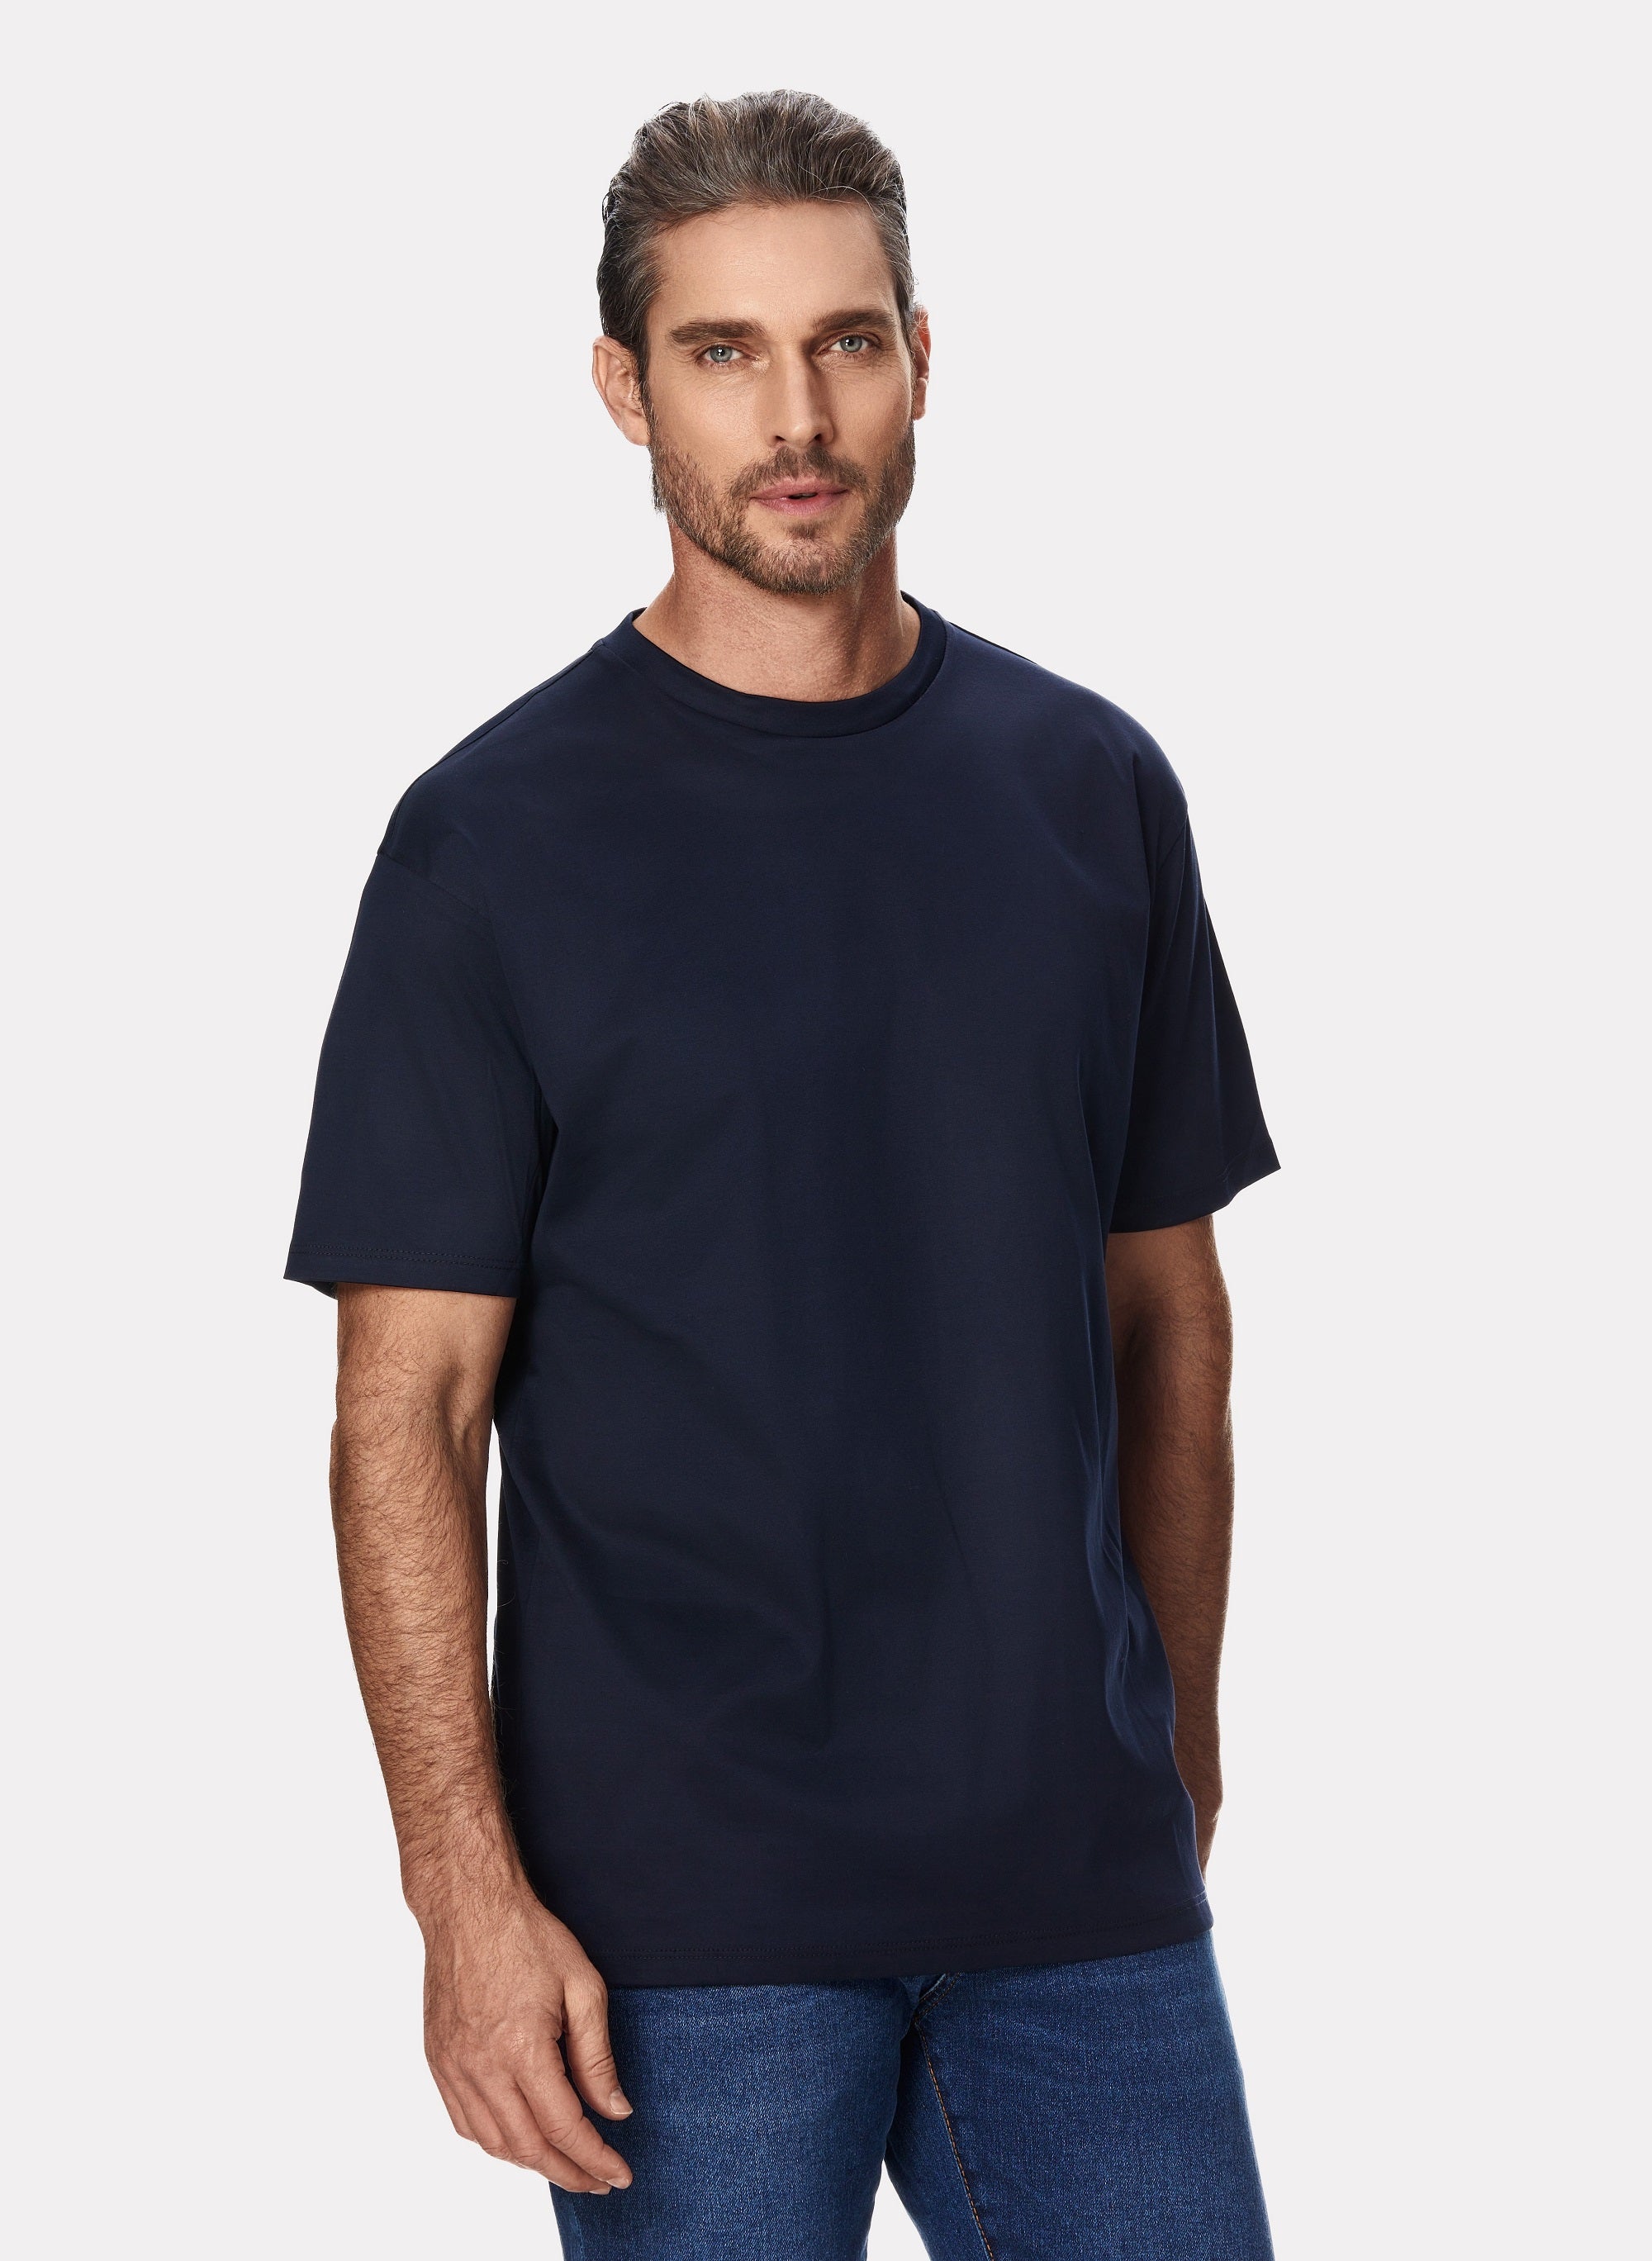 Navy cotton t-shirt with octagon